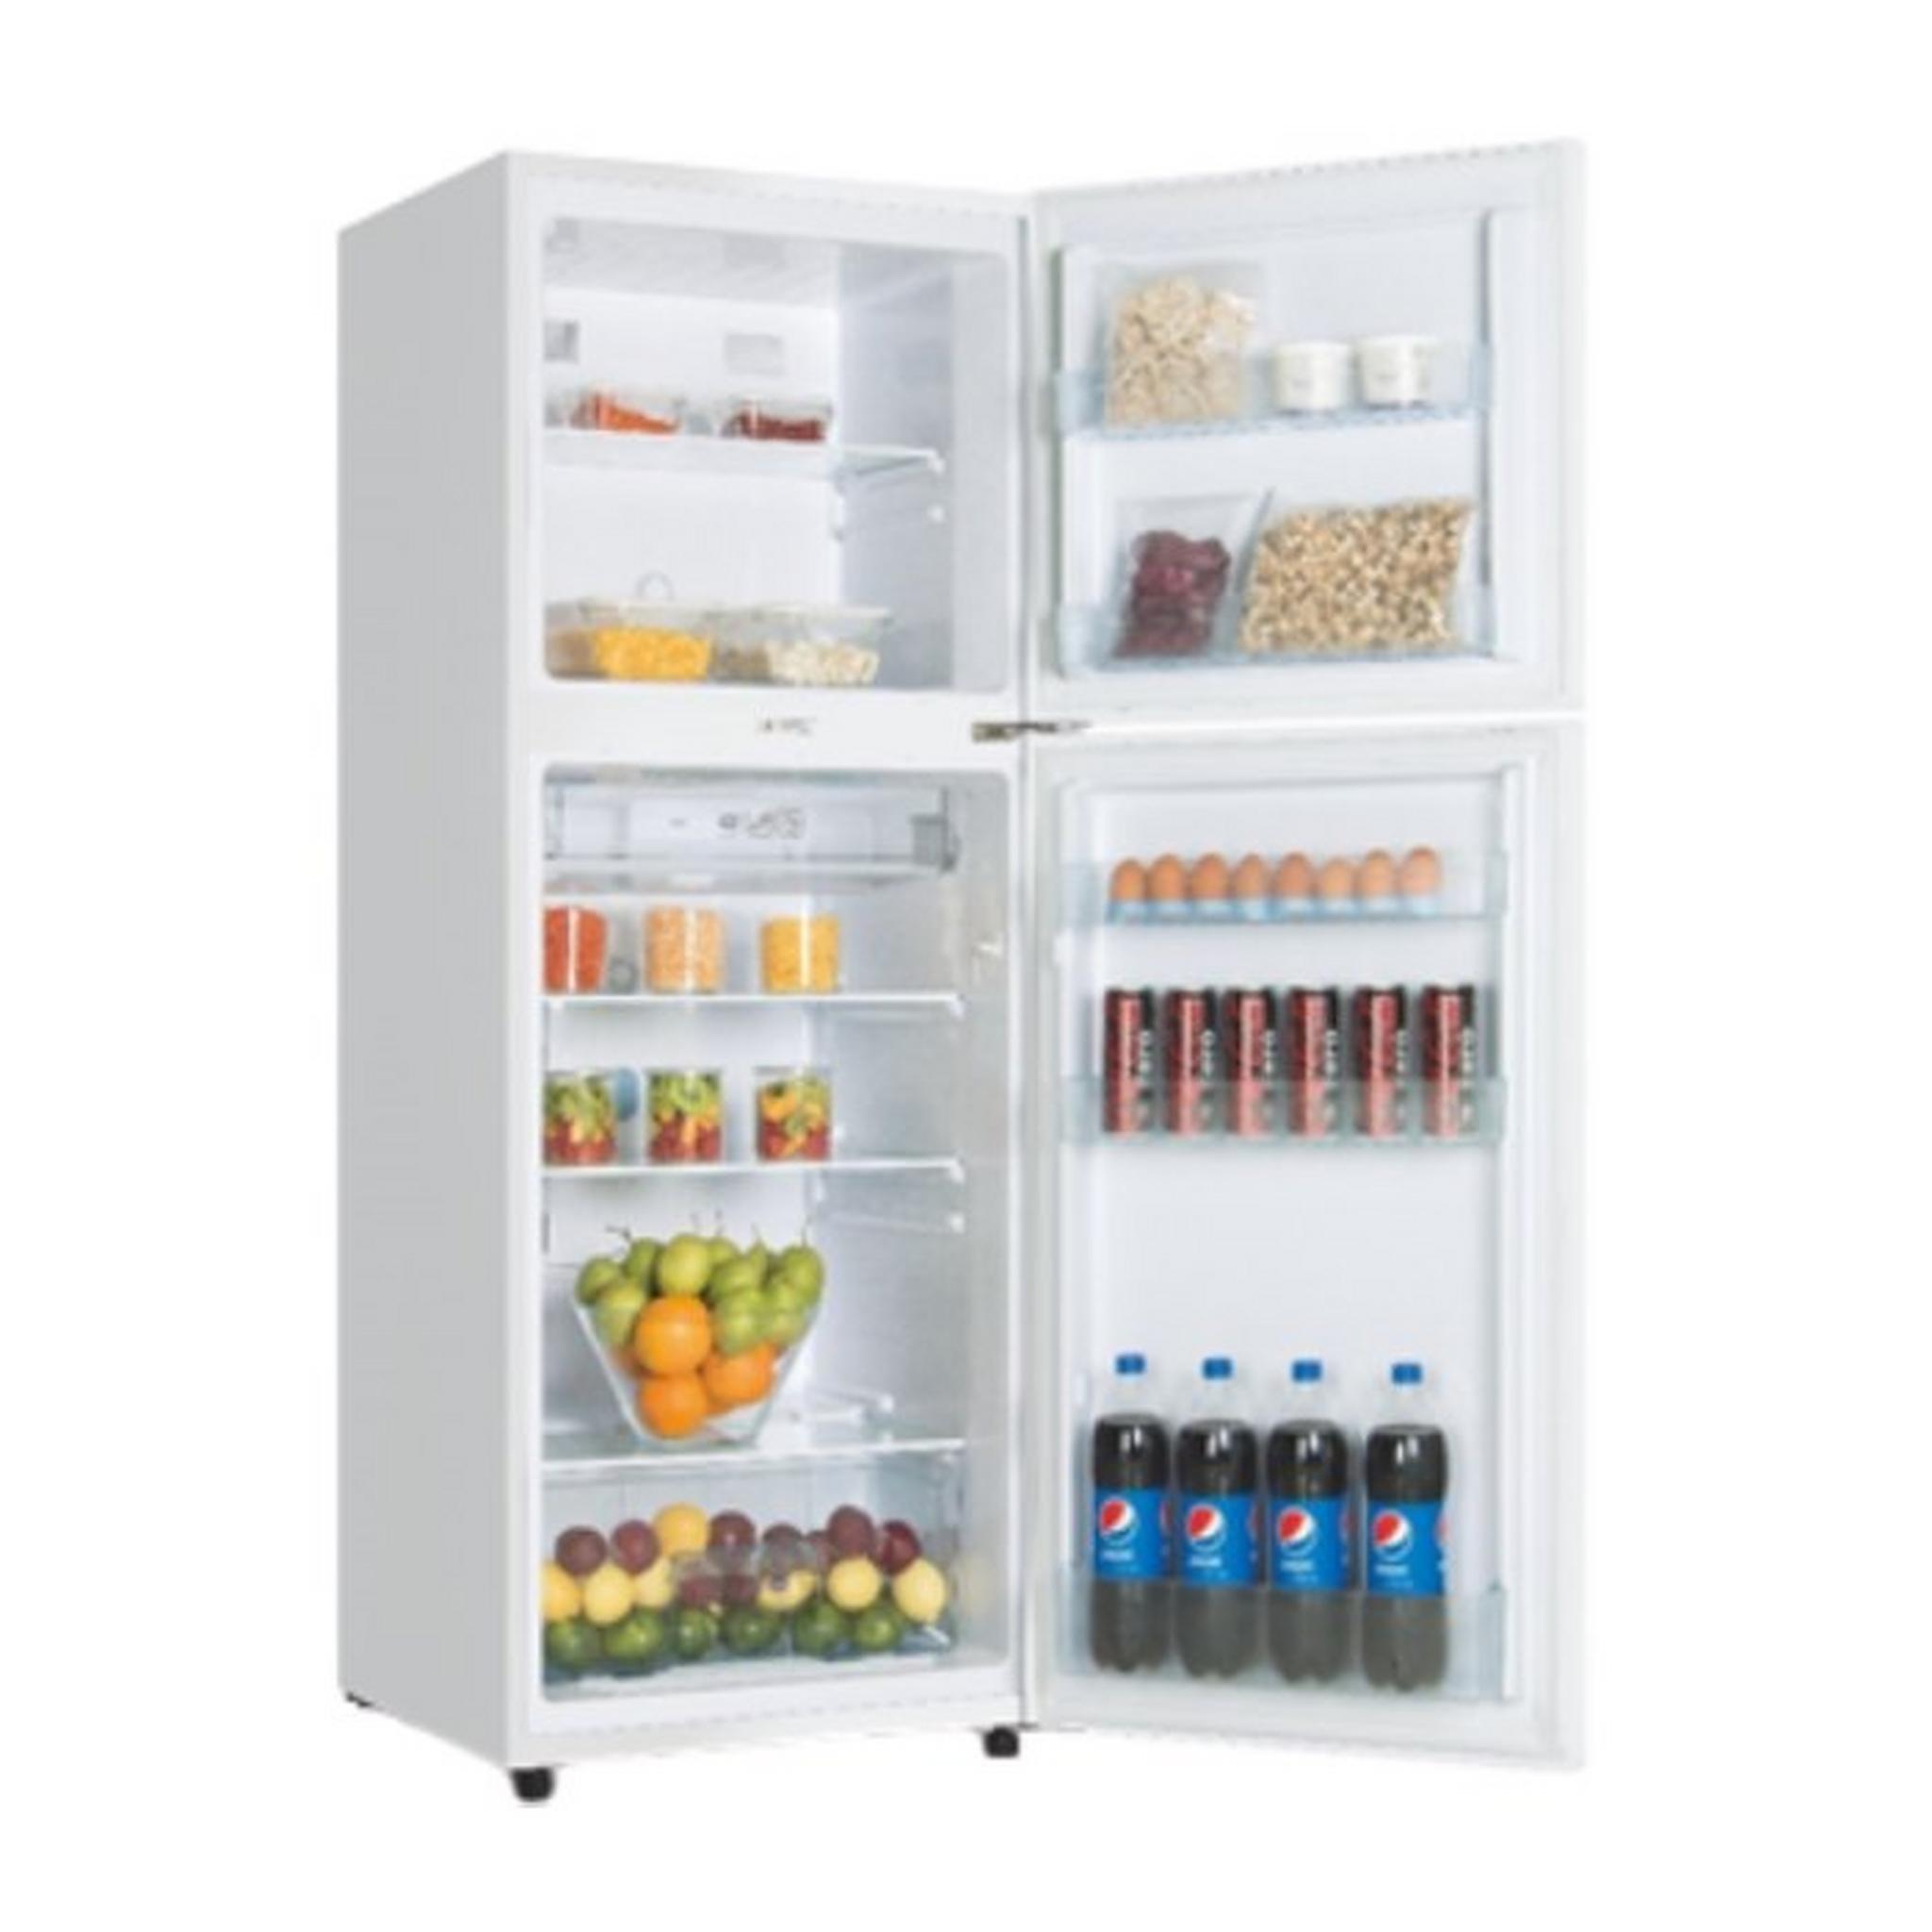 Haier 13CFT Top Mount Refrigerator (HRF-380WH)